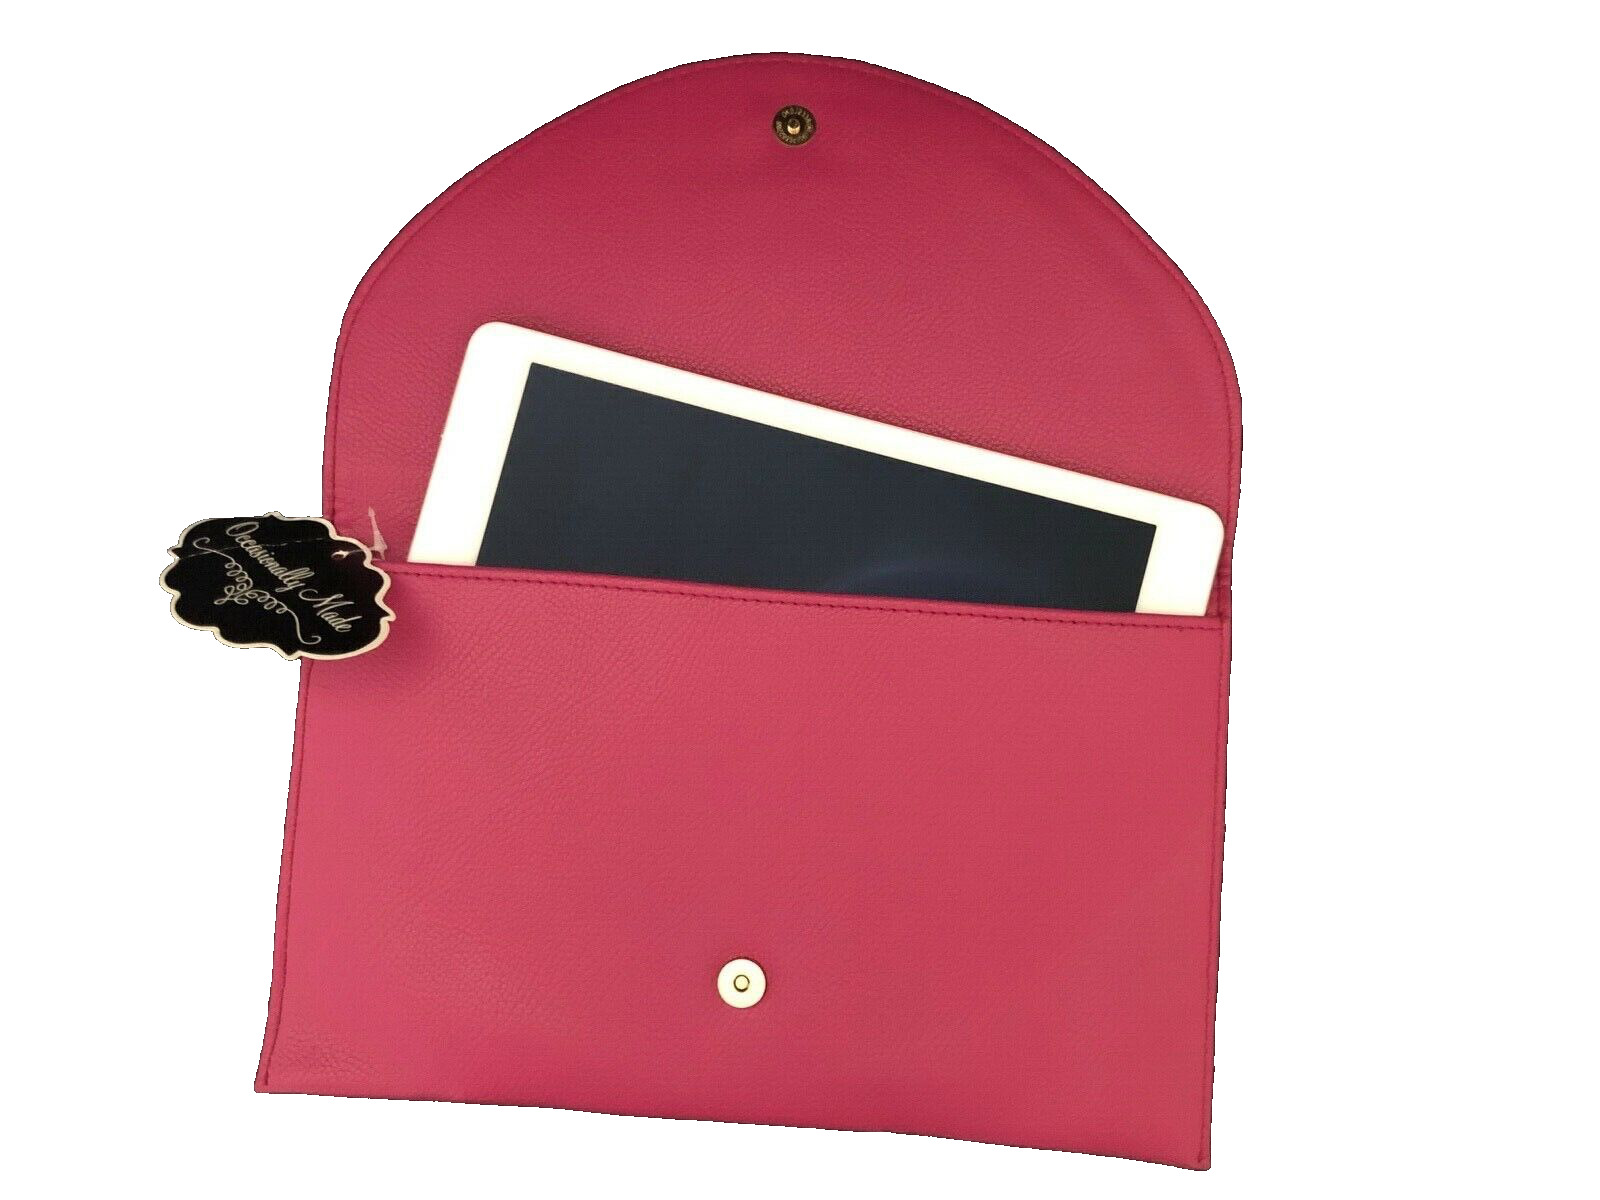 Occasionally Made iPad Tablet Sleeve Pouch w/ OverBody Strap (iPAD NOT INCLUDED)